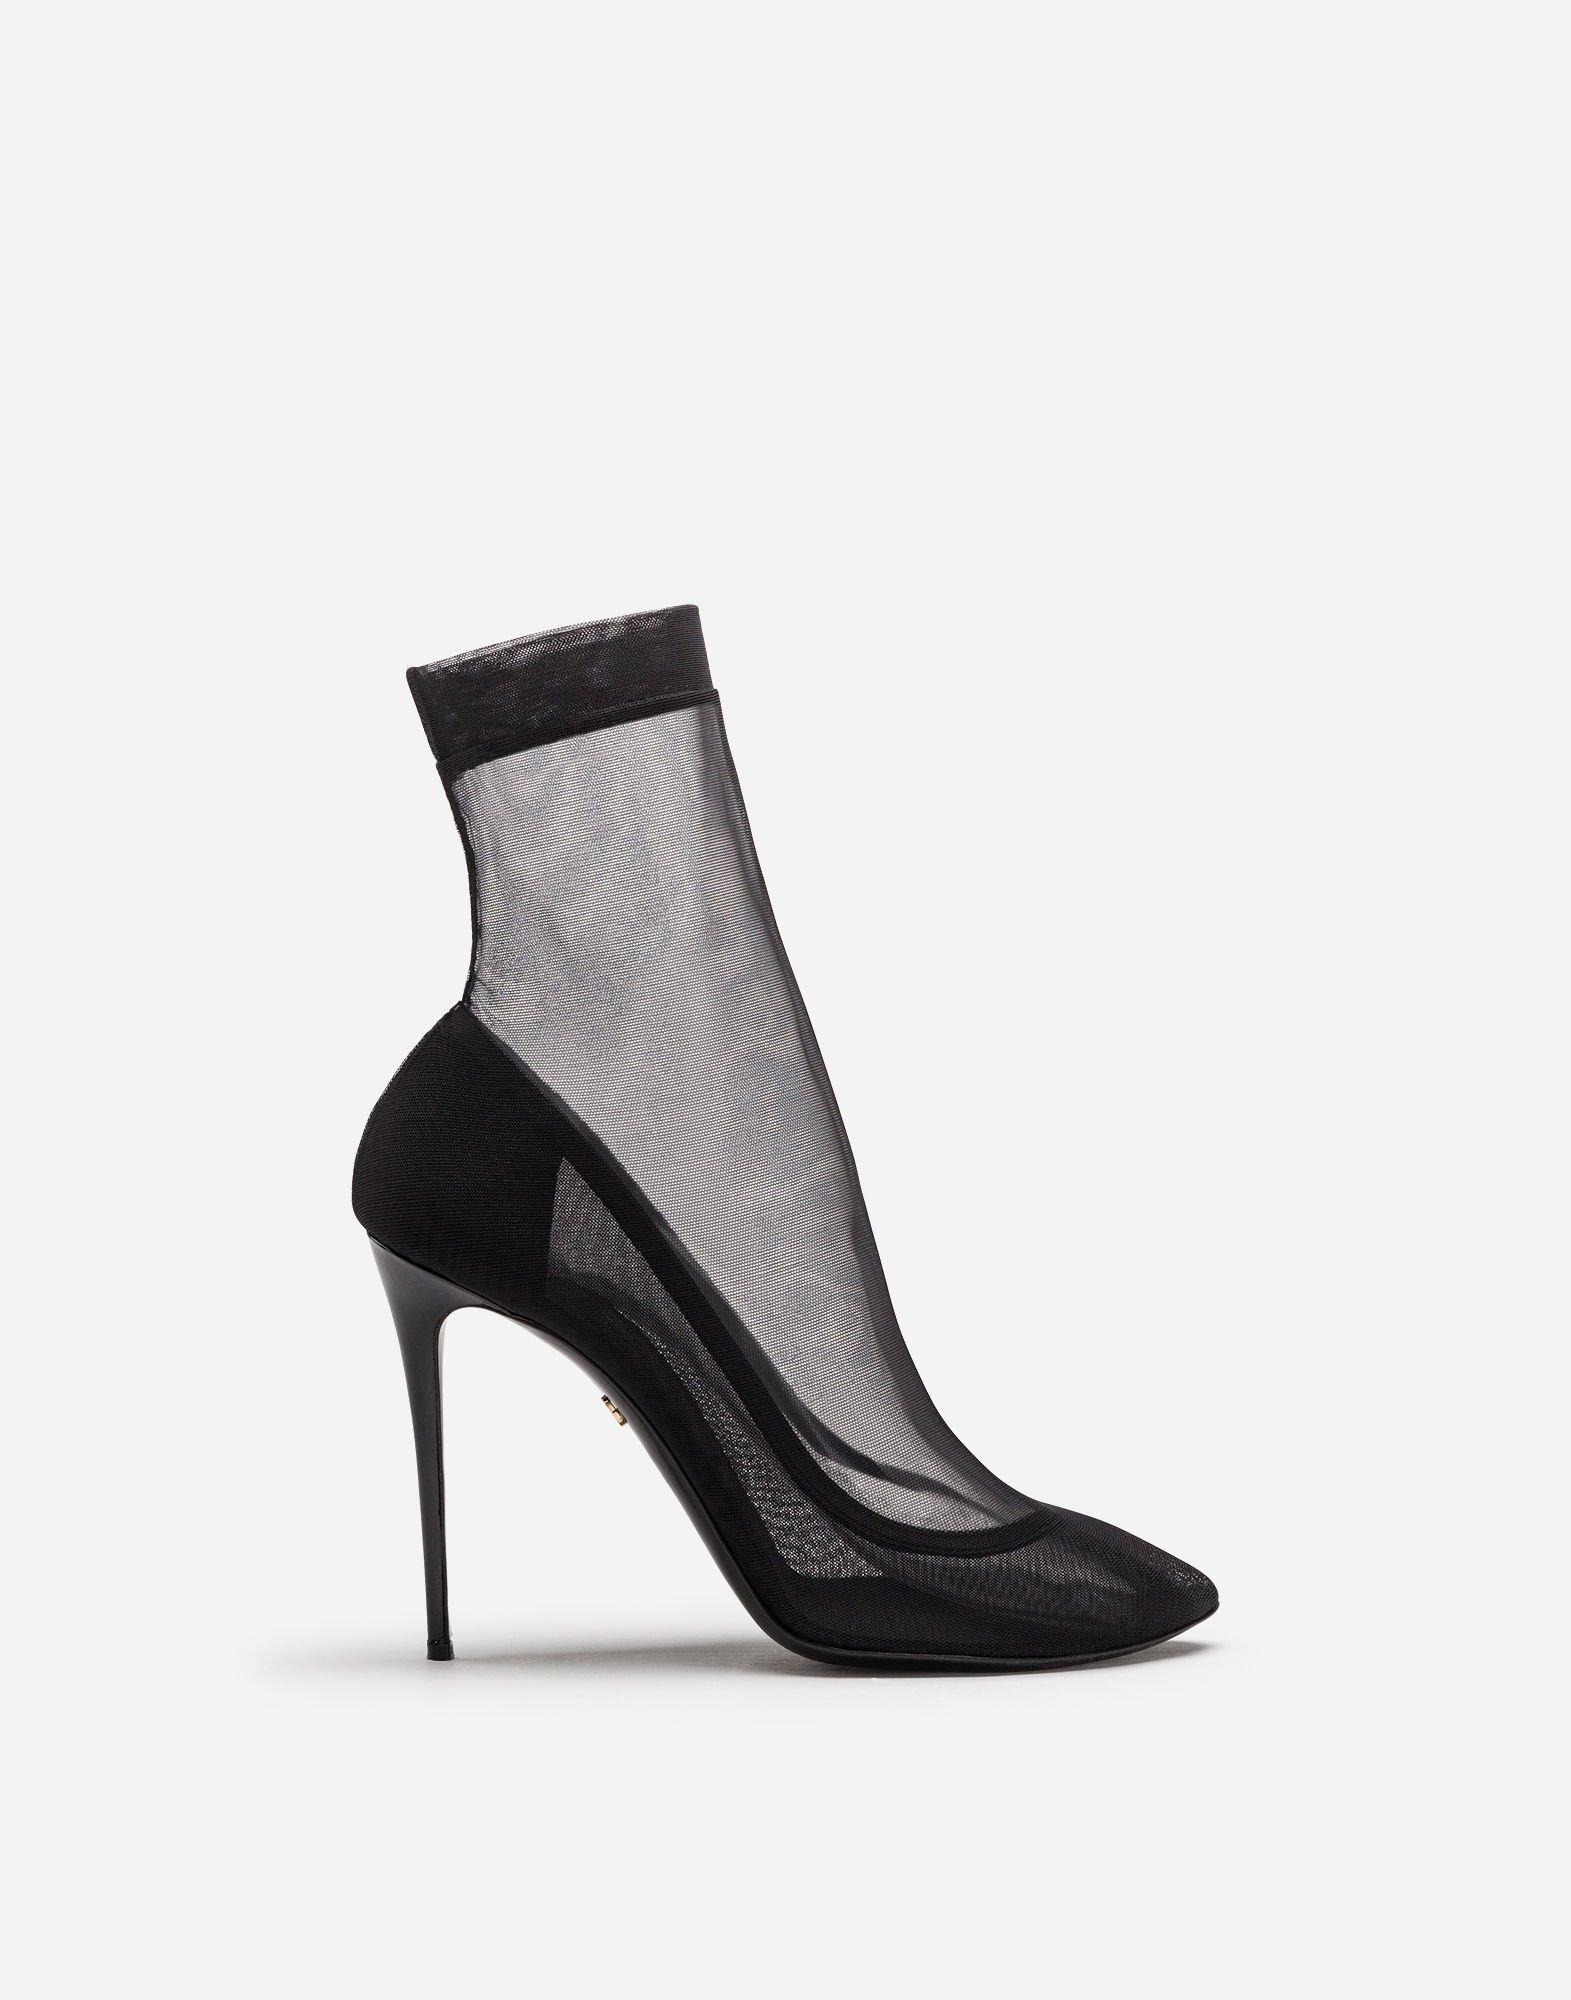 Lyst - Dolce & Gabbana Stretch Tulle And Patent Leather Booties in Black